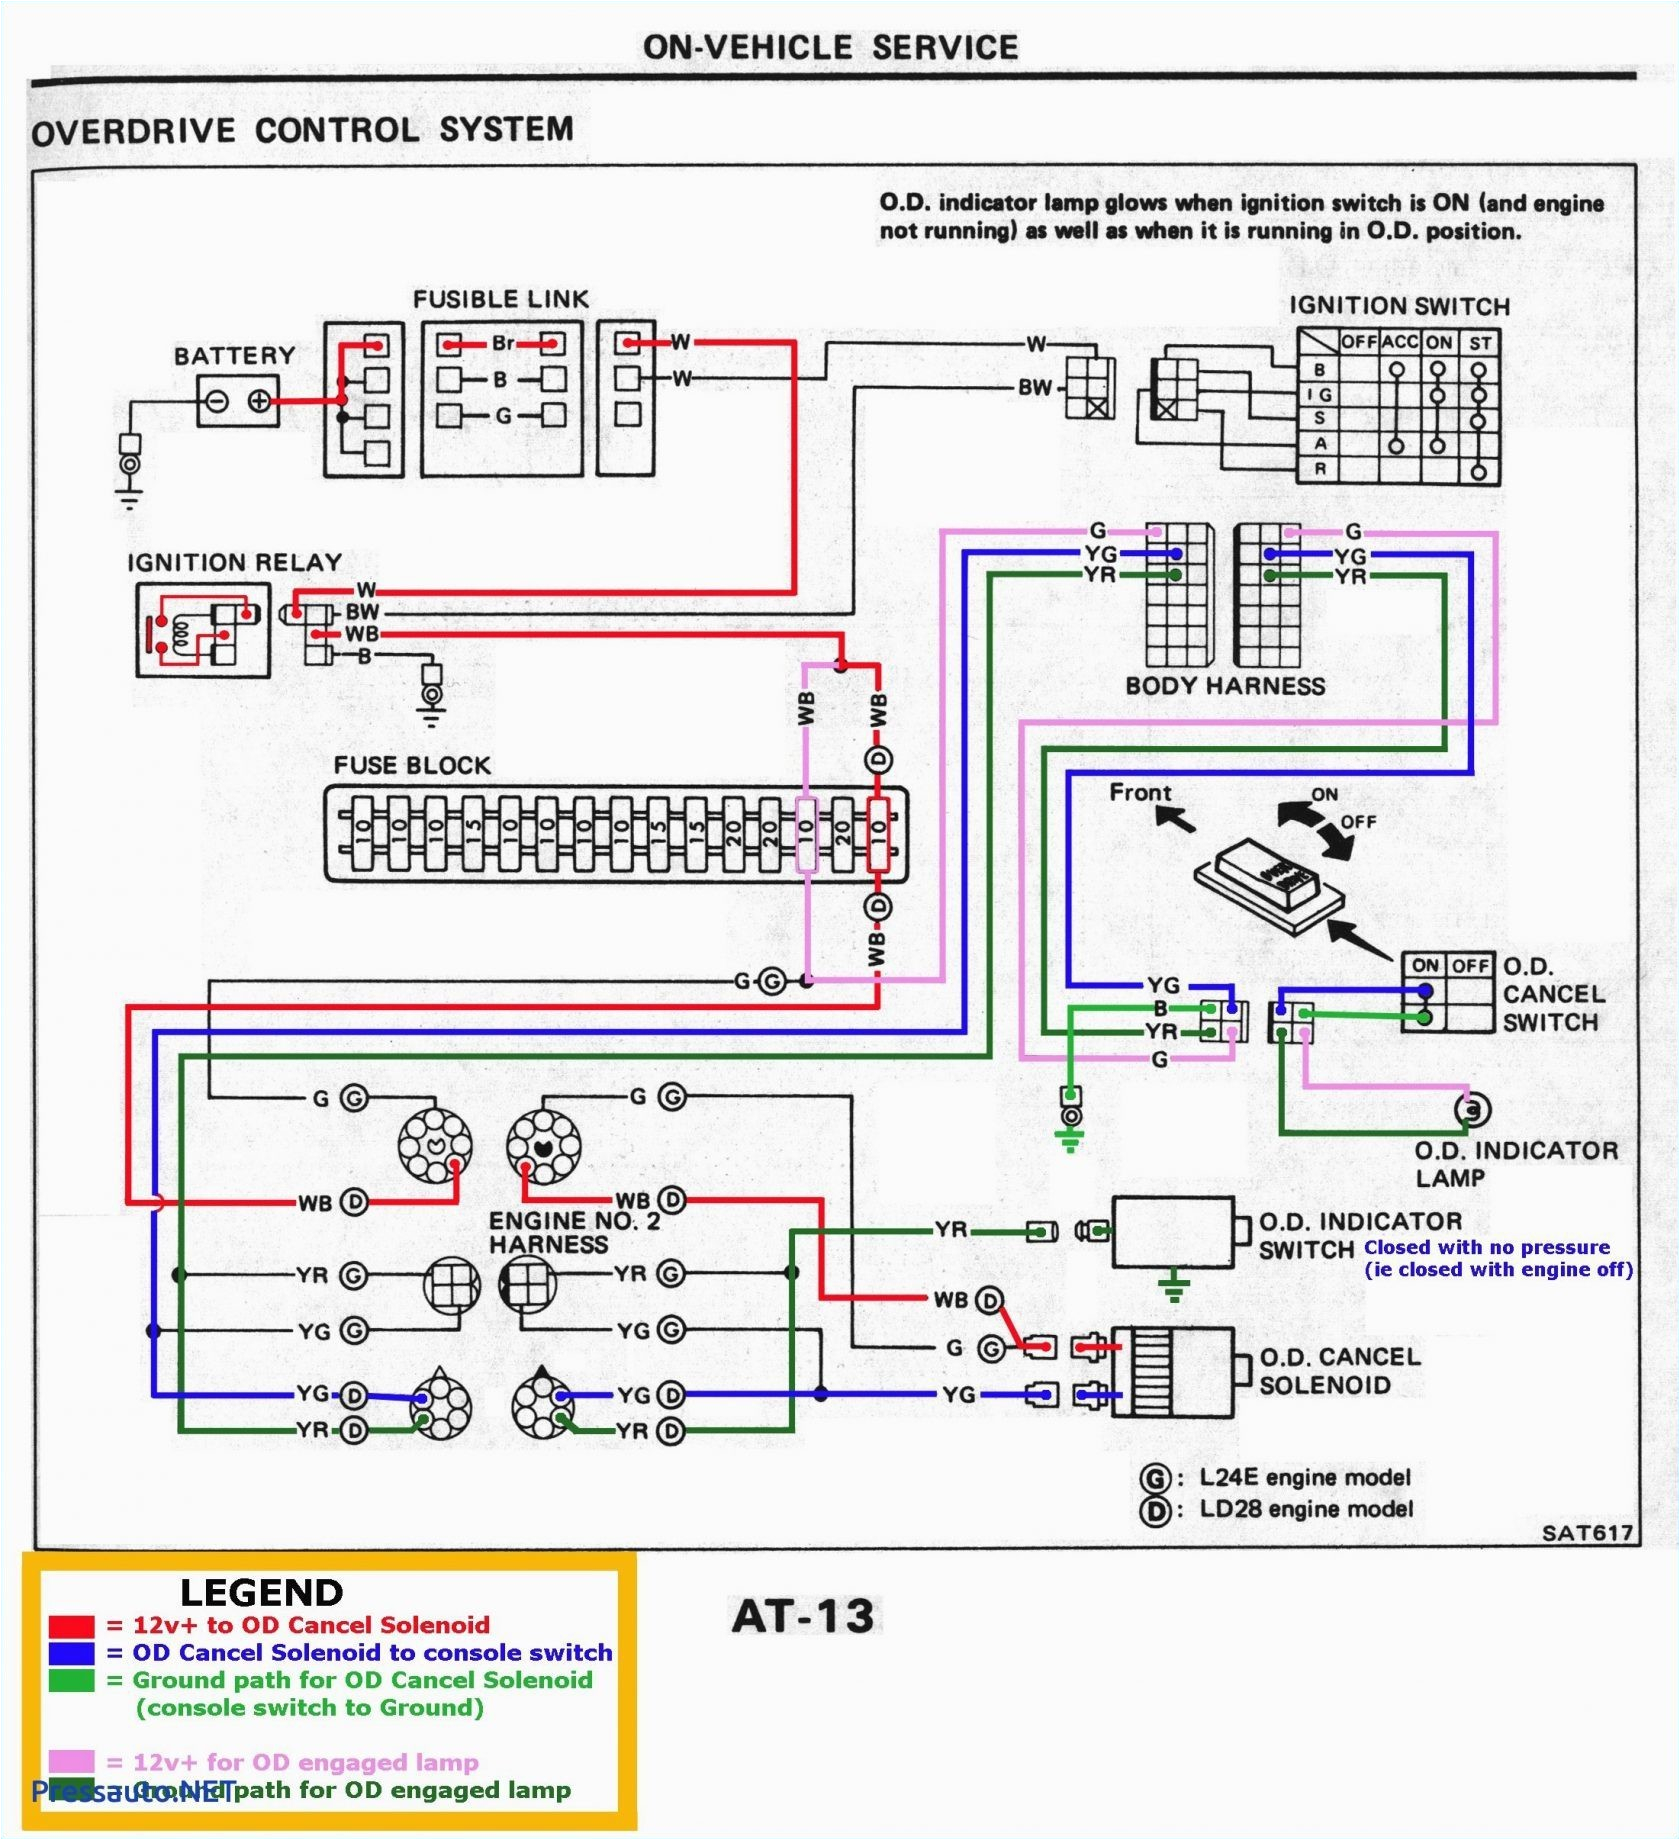 Mk4 Golf Wiring Diagram Wiring Diagram for Hummer H2 Stereo Wiring Diagram Centre